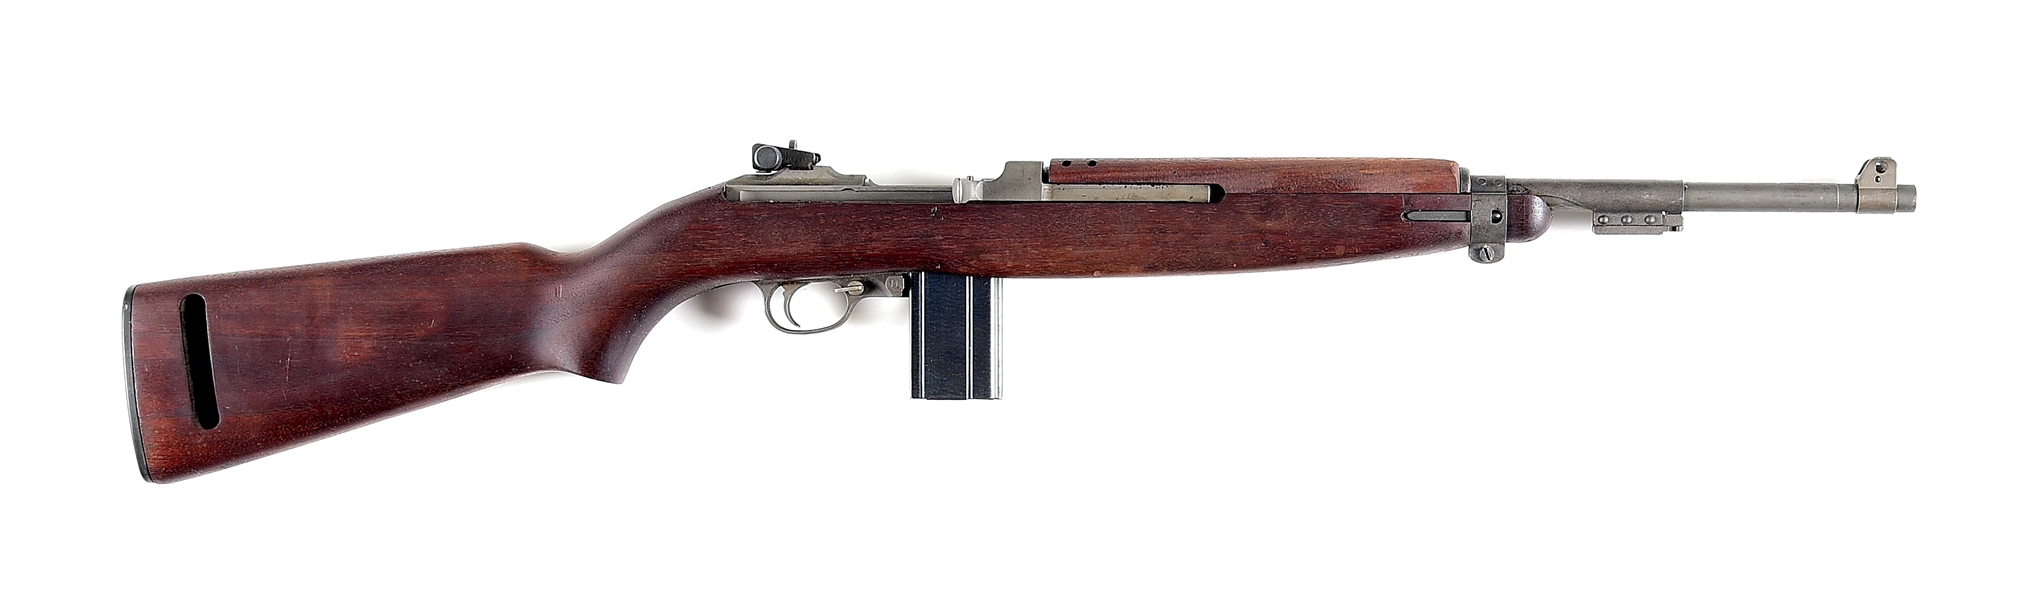 (C) EARLY FIRST SERIAL BLOCK UNDERWOOD M1 SEMI-AUTOMATIC CARBINE.